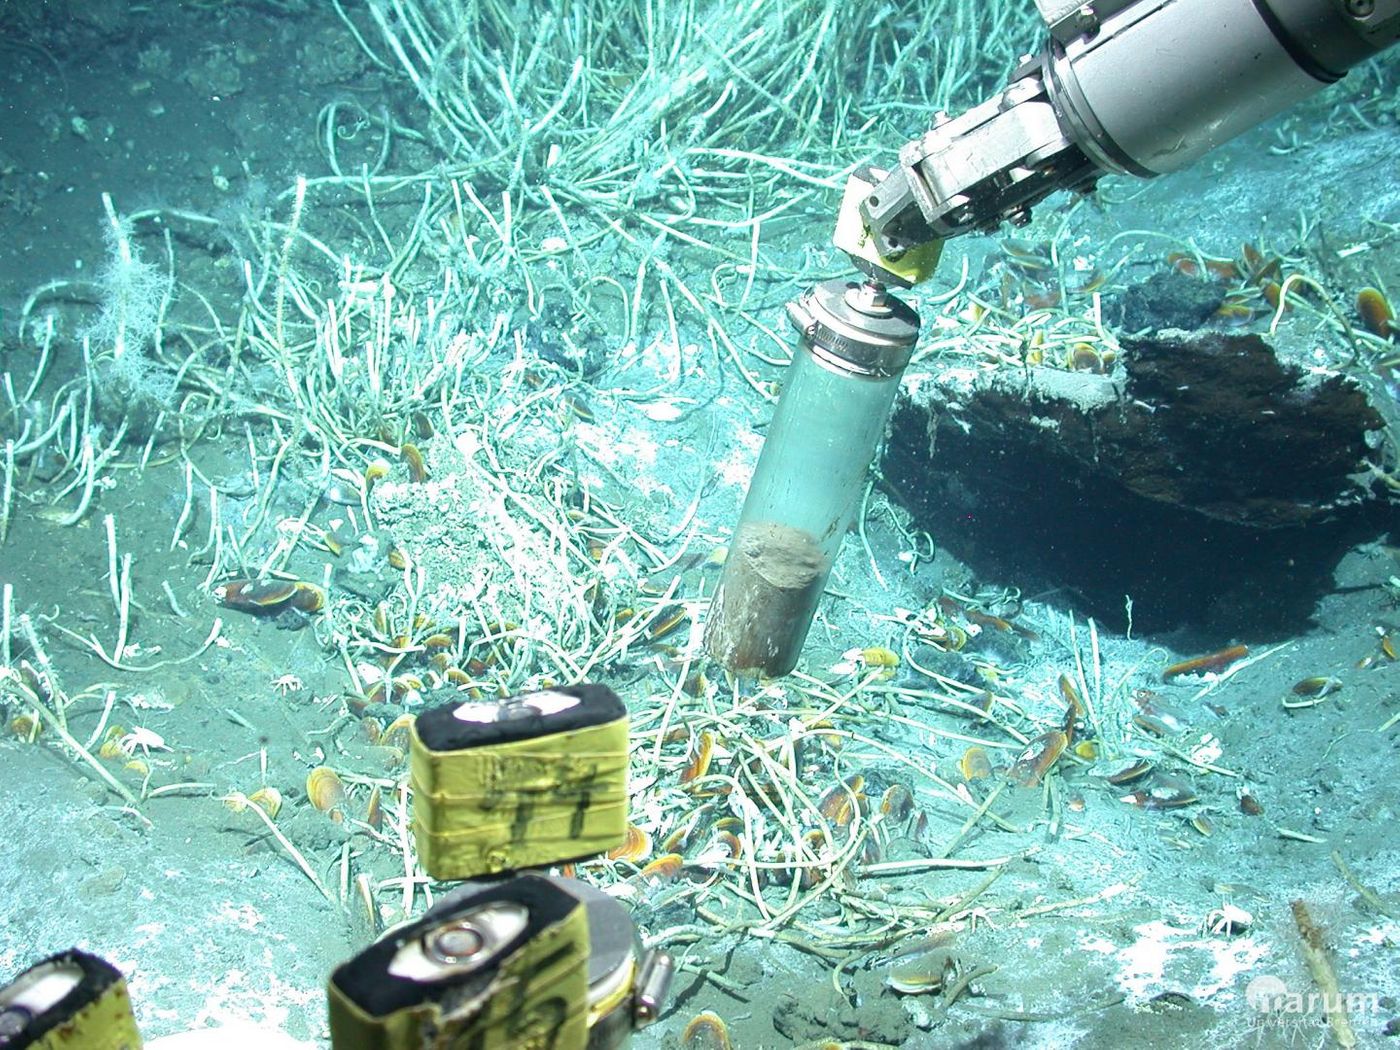 The submersible vehicle MARUM-QUEST samples for sediment at oil seeps in the Gulf of Mexico. / Credit: MARUM -- Center for Marine Environmental Sciences